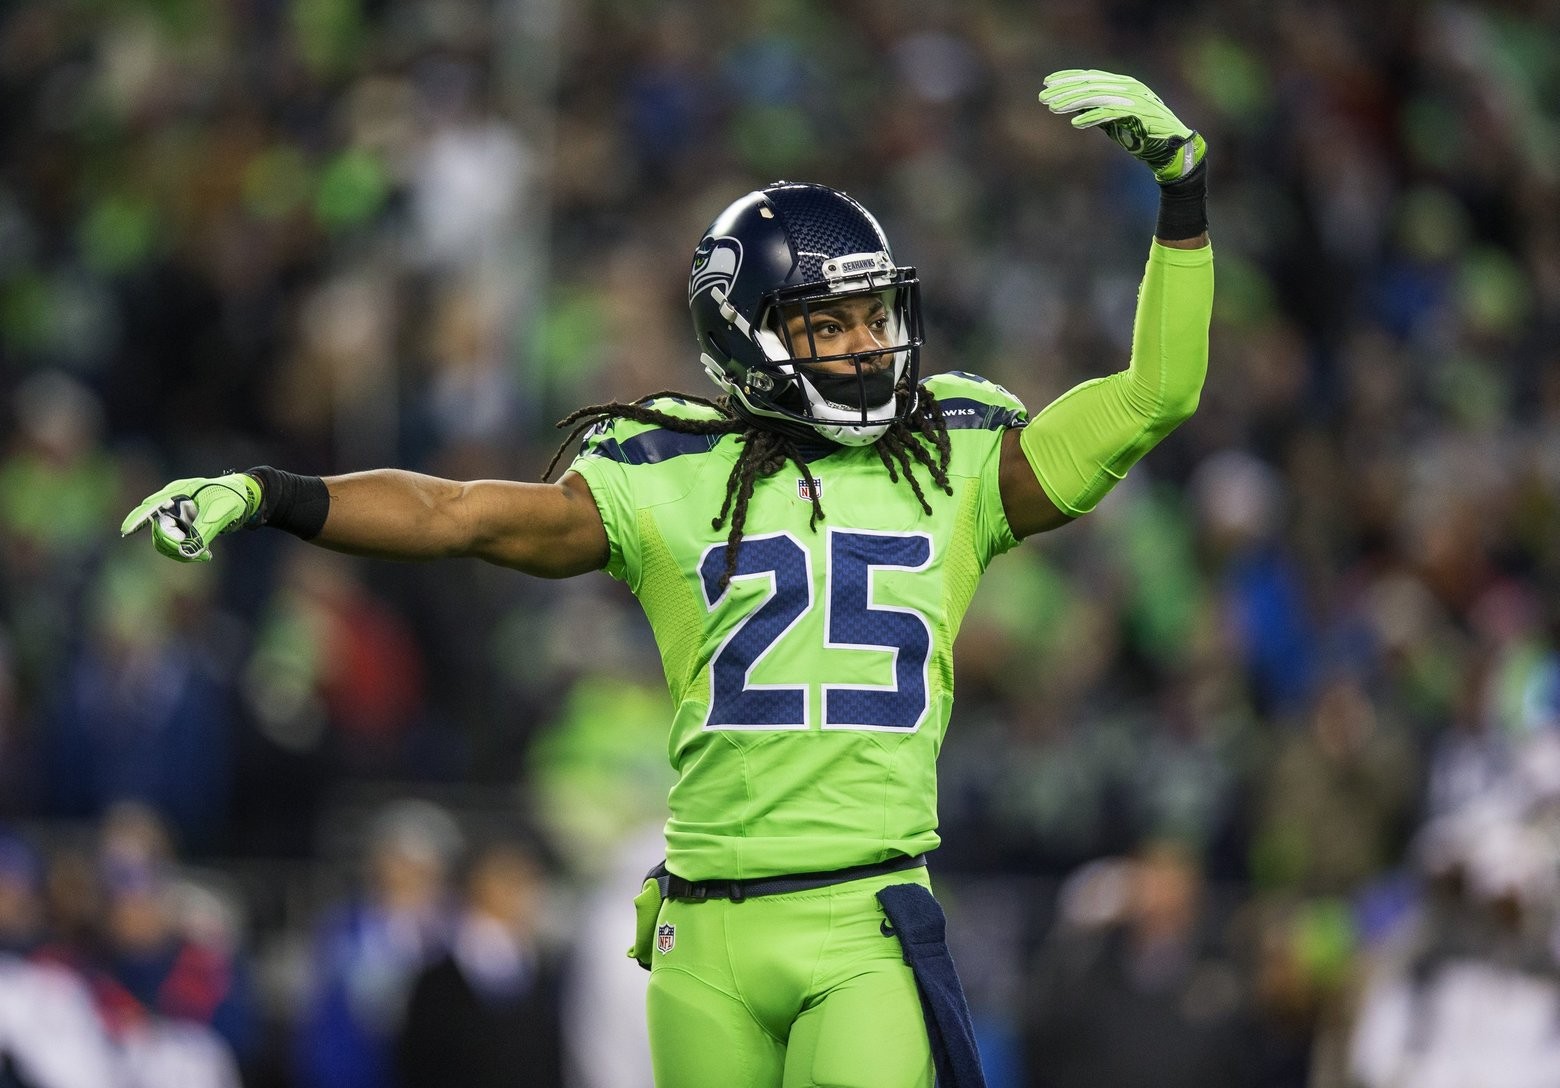 All neon everything. How do you feel about the Seahawksâ€™ â€˜Action Greenâ€™ uniforms?